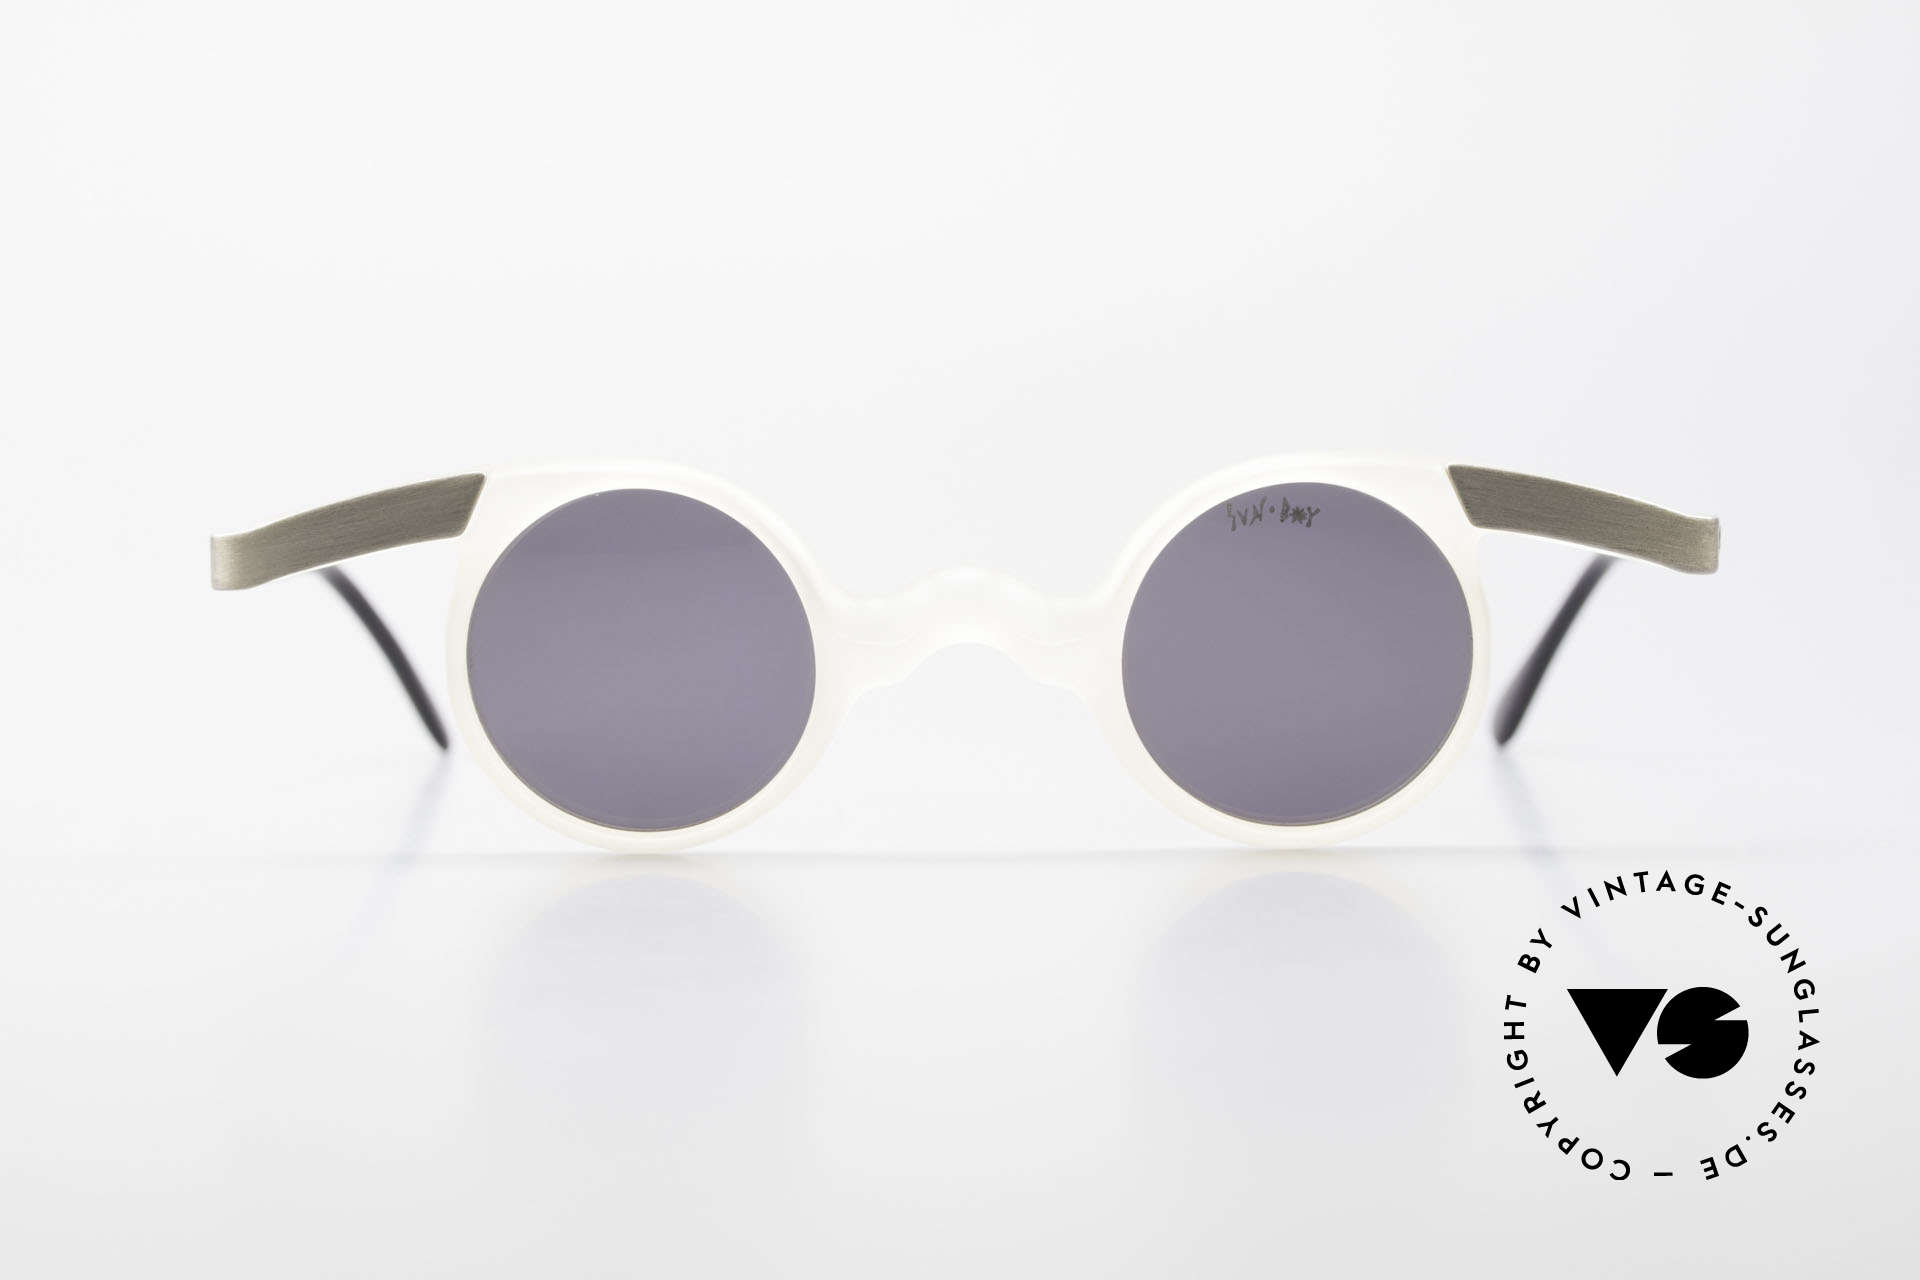 Sunboy SB39 Vintage No Retro Sunglasses, never worn (like all our unique vintage 90's shades), Made for Men and Women